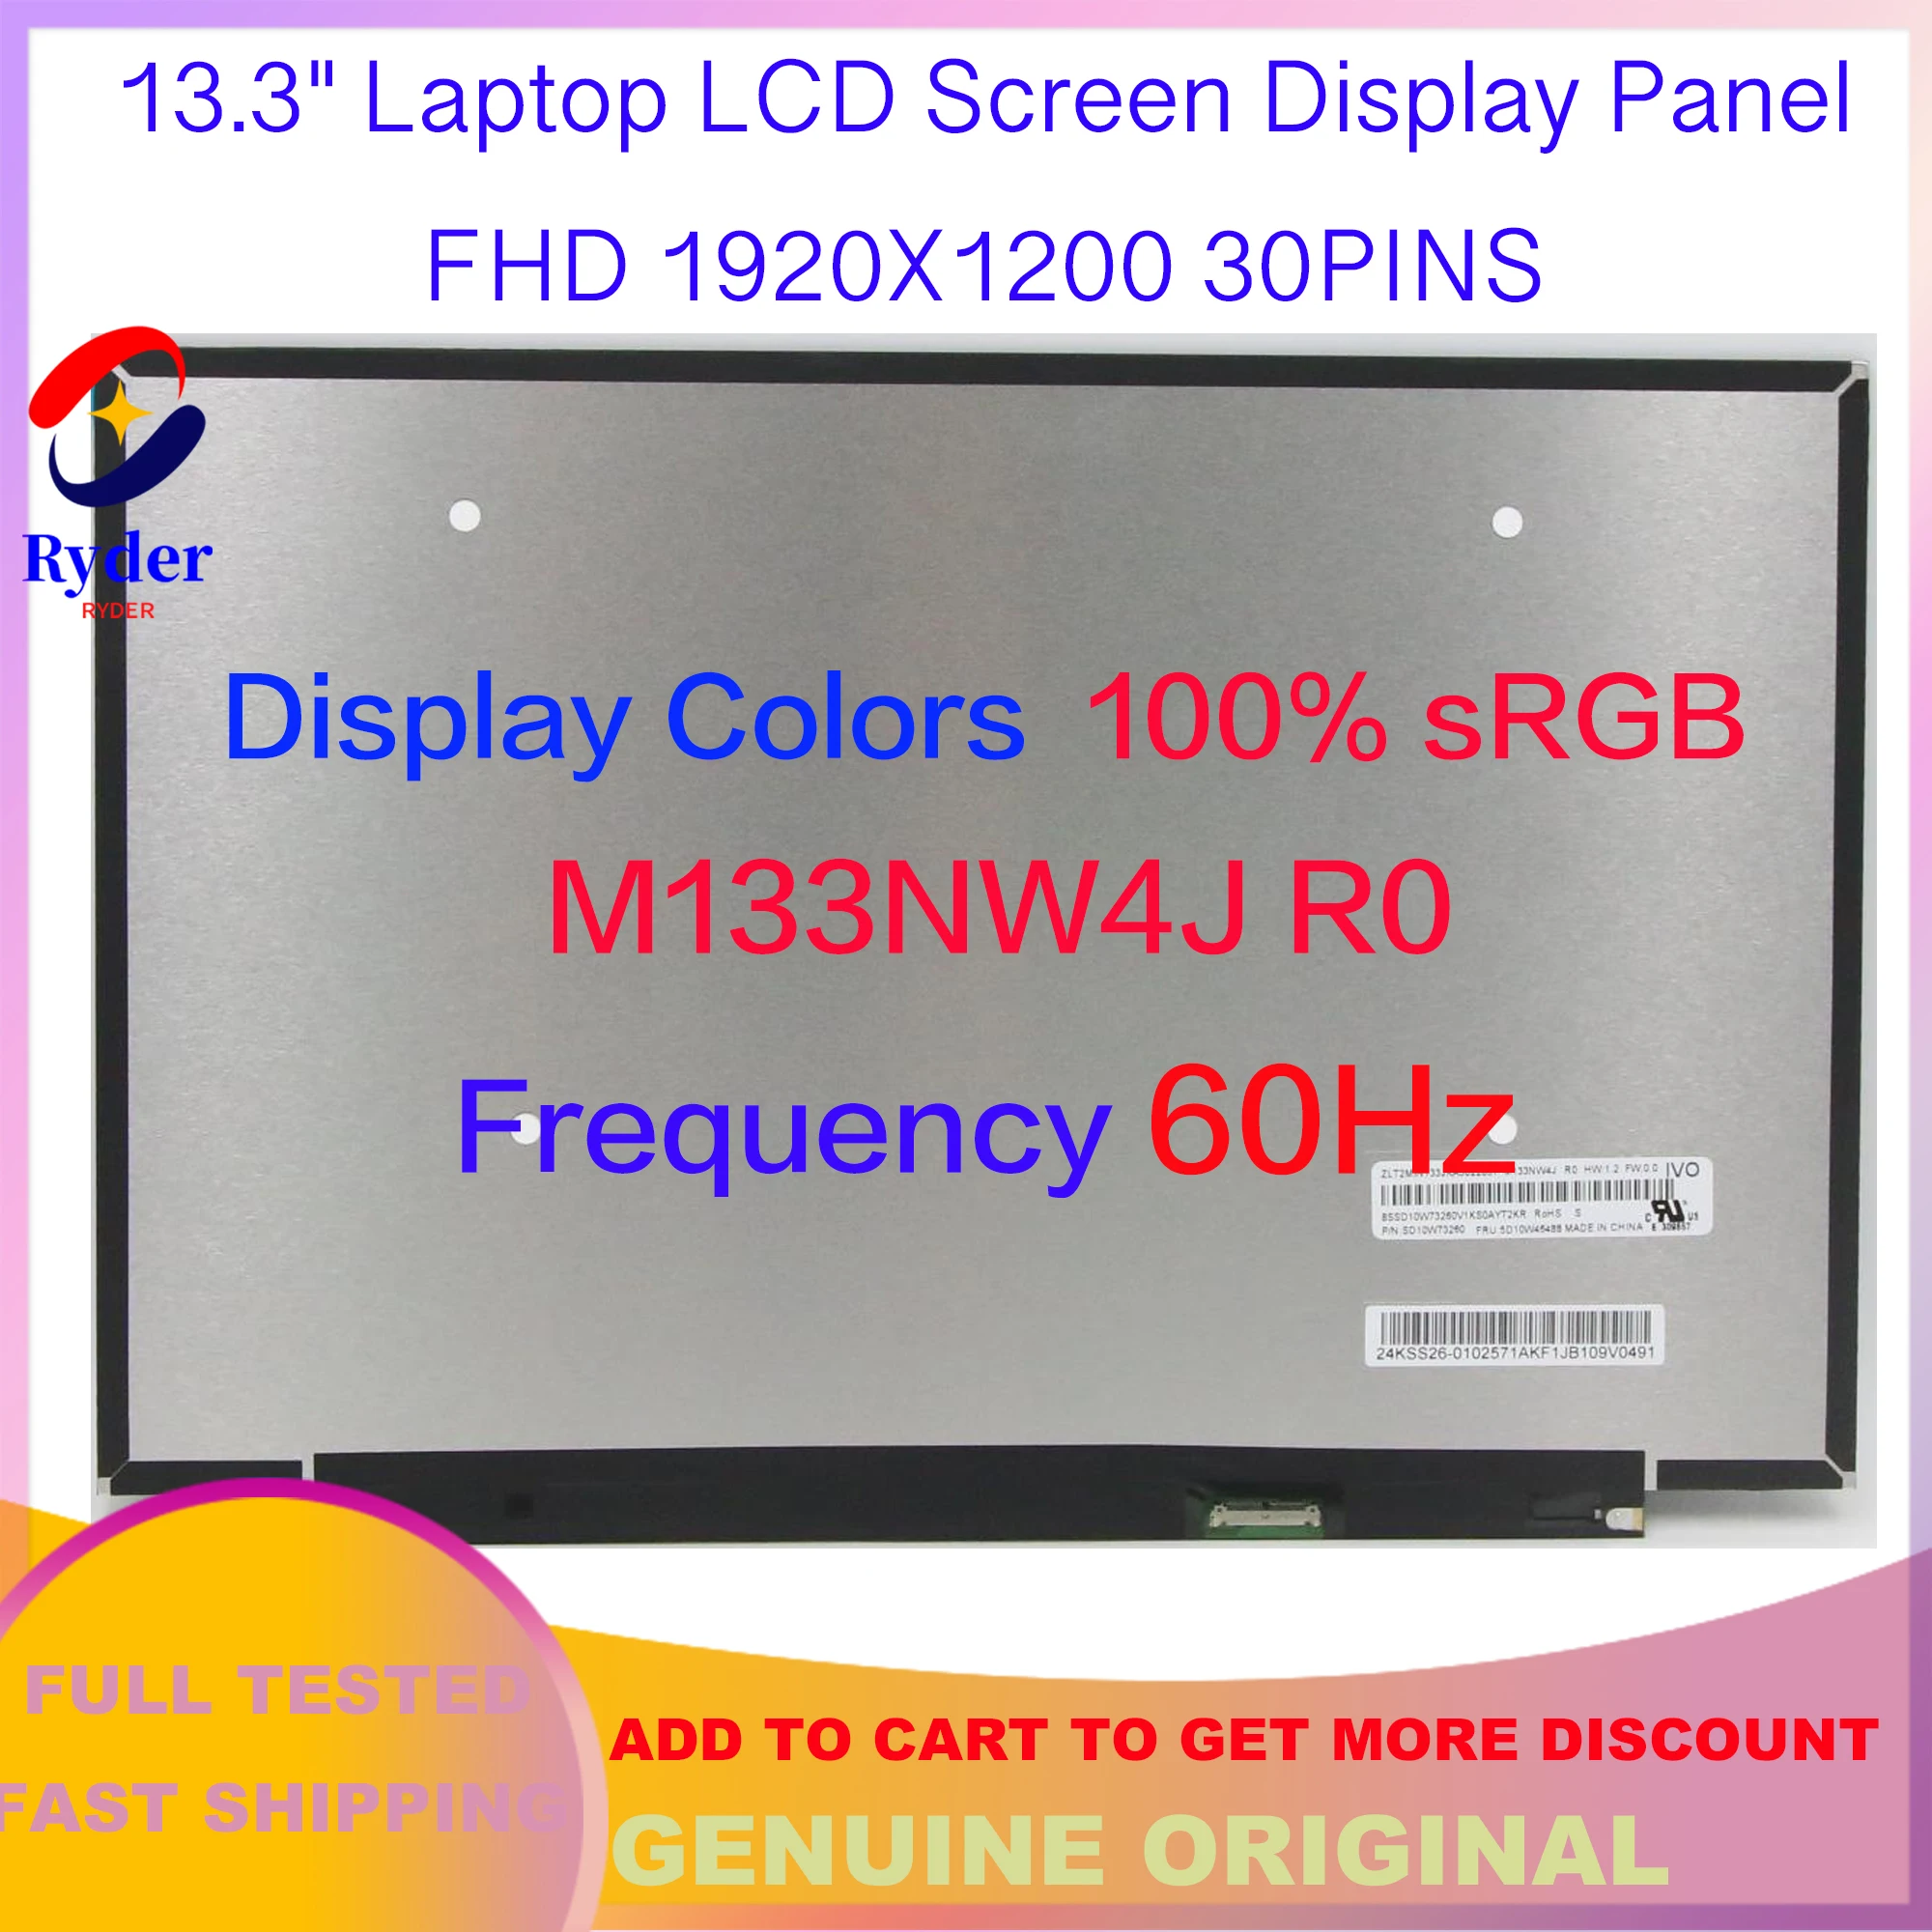 

13.3" 1920x1200 IPS Laptop LCD Screen Display B133UAN01.0 M133NW4J R0 For Lenovo ThinkBook 13s G2 ITL ARE G3 ACN G4 IAP ARB